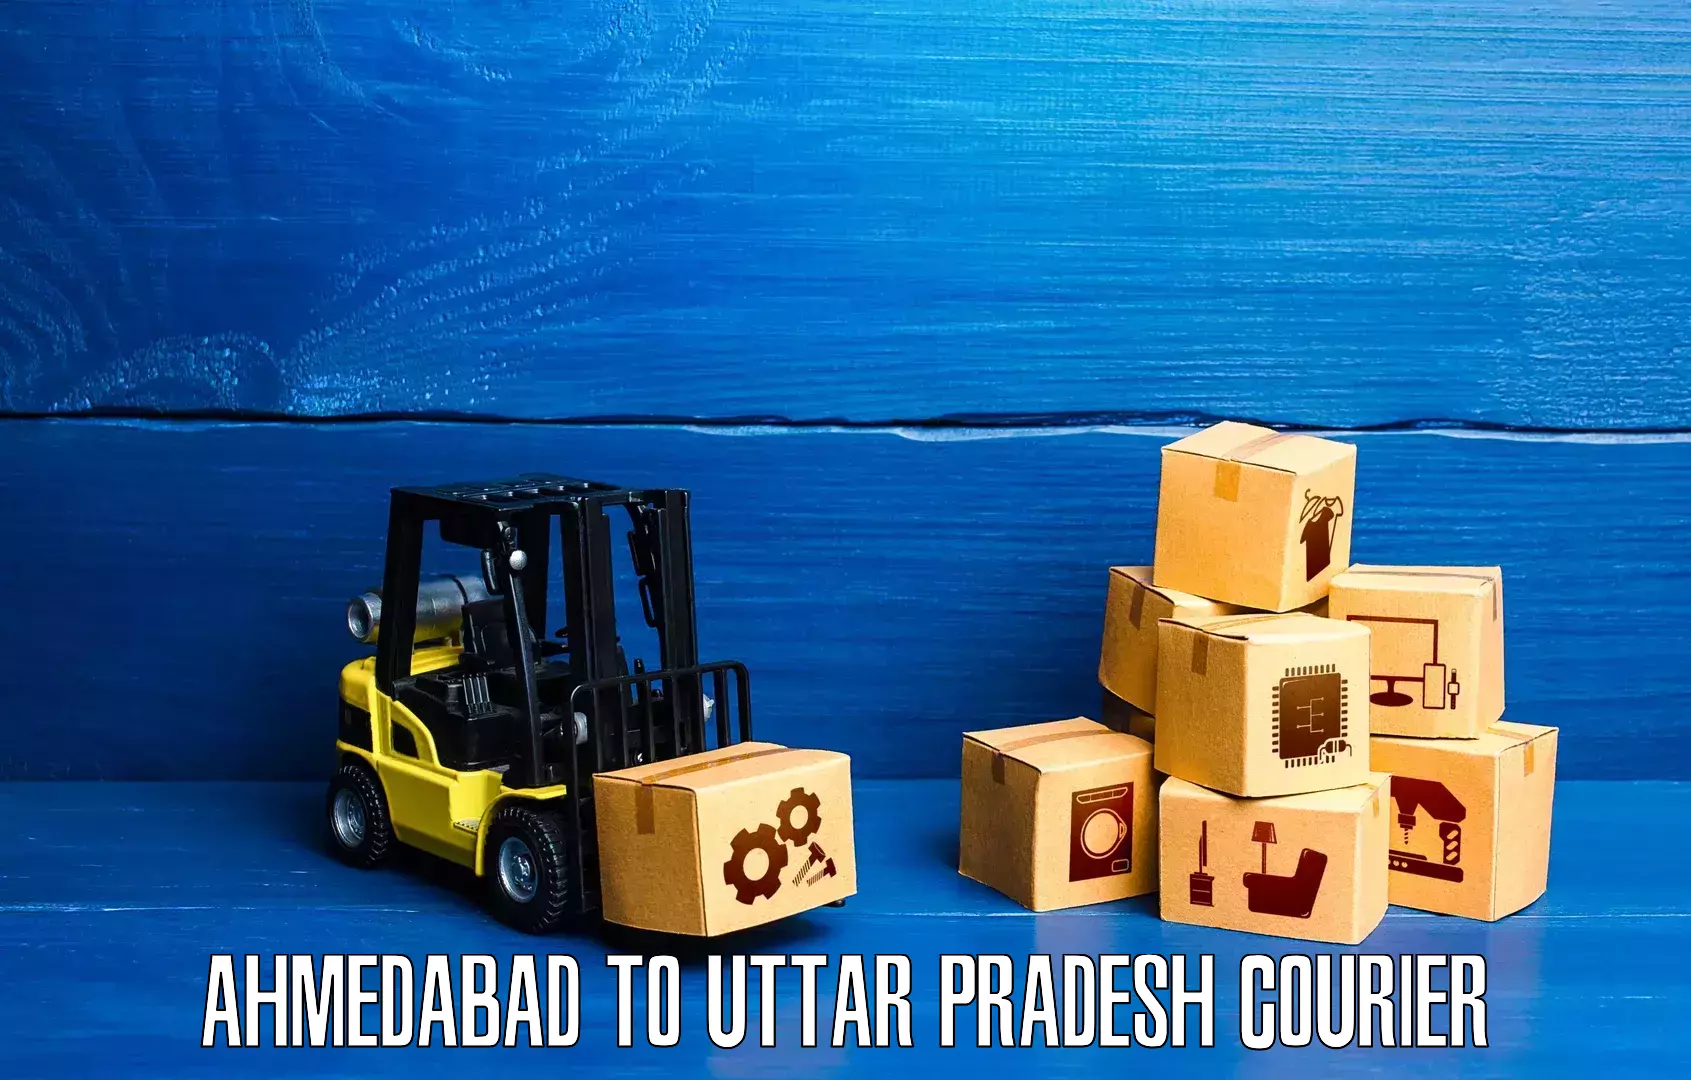 State-of-the-art courier technology Ahmedabad to Uttar Pradesh